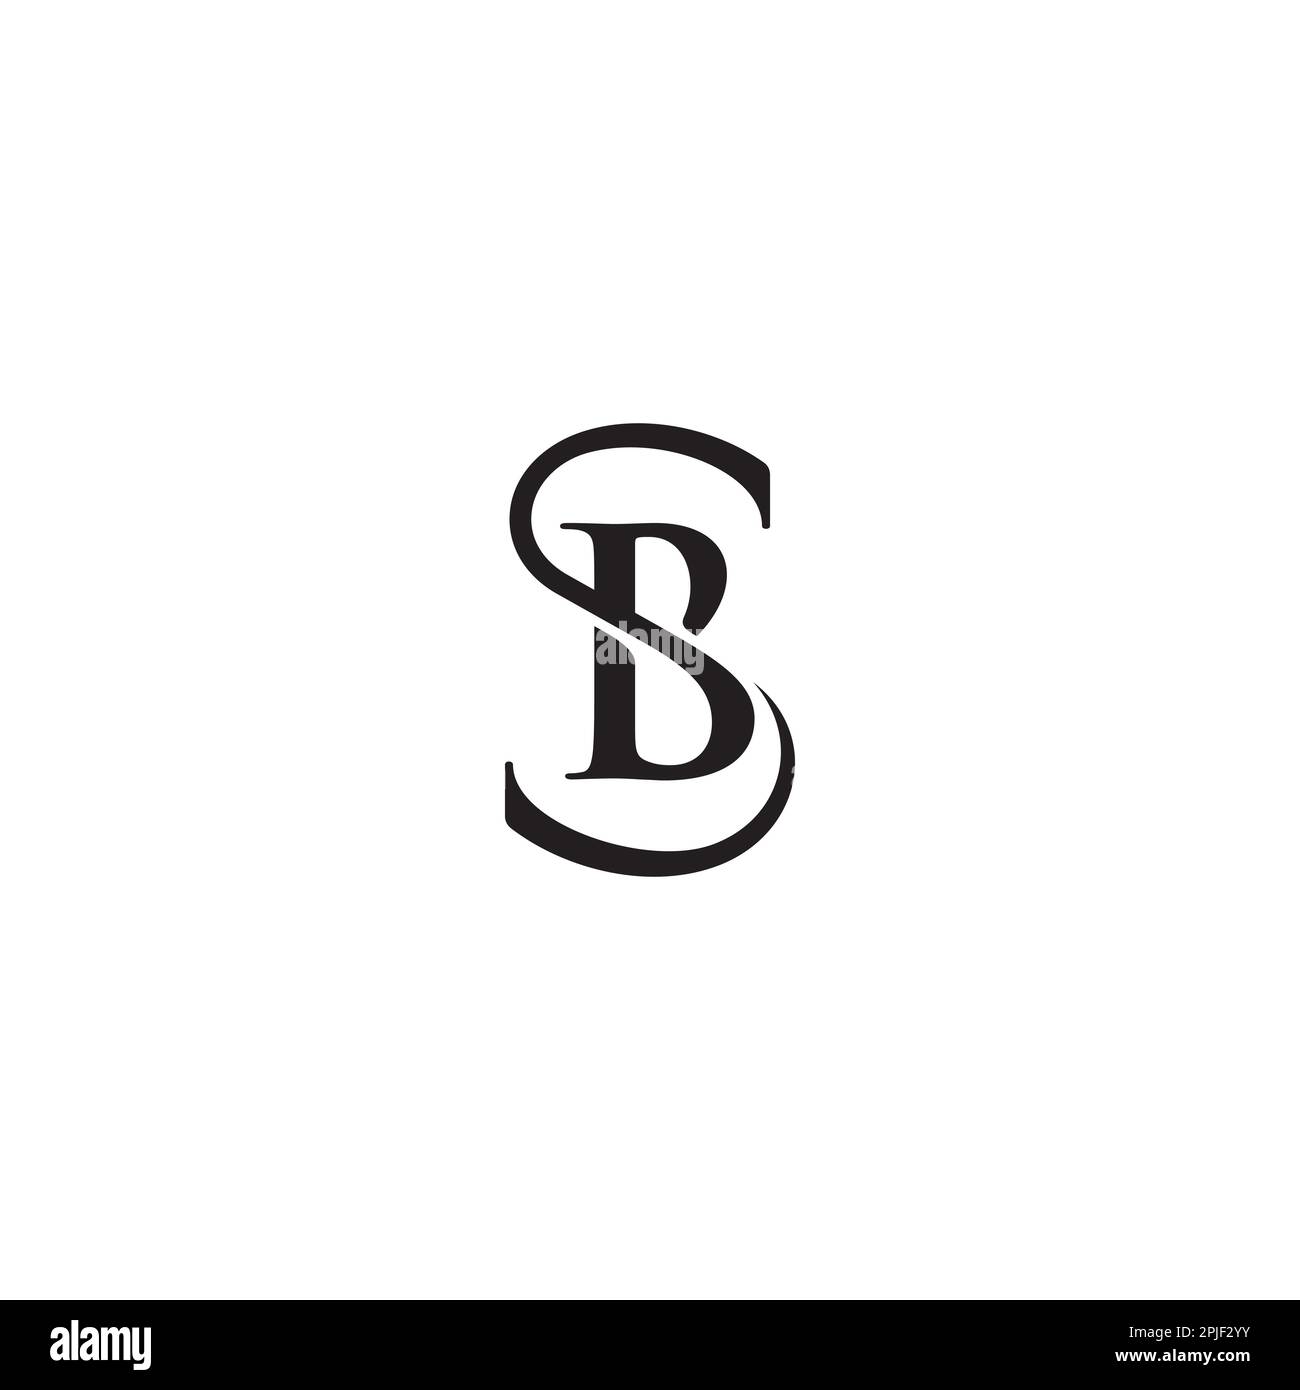 Sb s b letter logo with color block design Vector Image